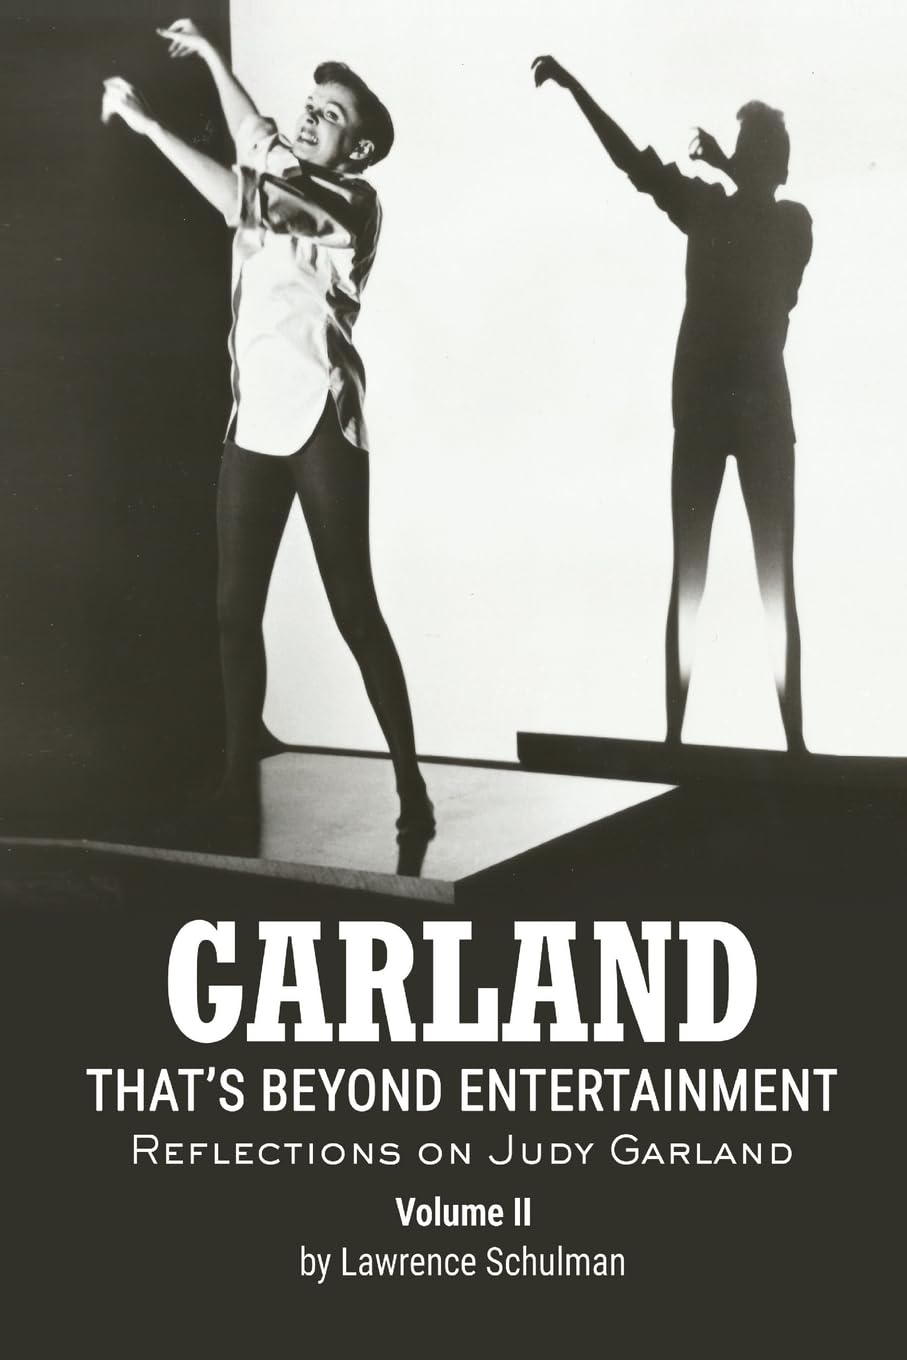 Garland - That's Beyond Entertainment - Reflections on Judy Garland Volume 2 by Lawrence Schulman